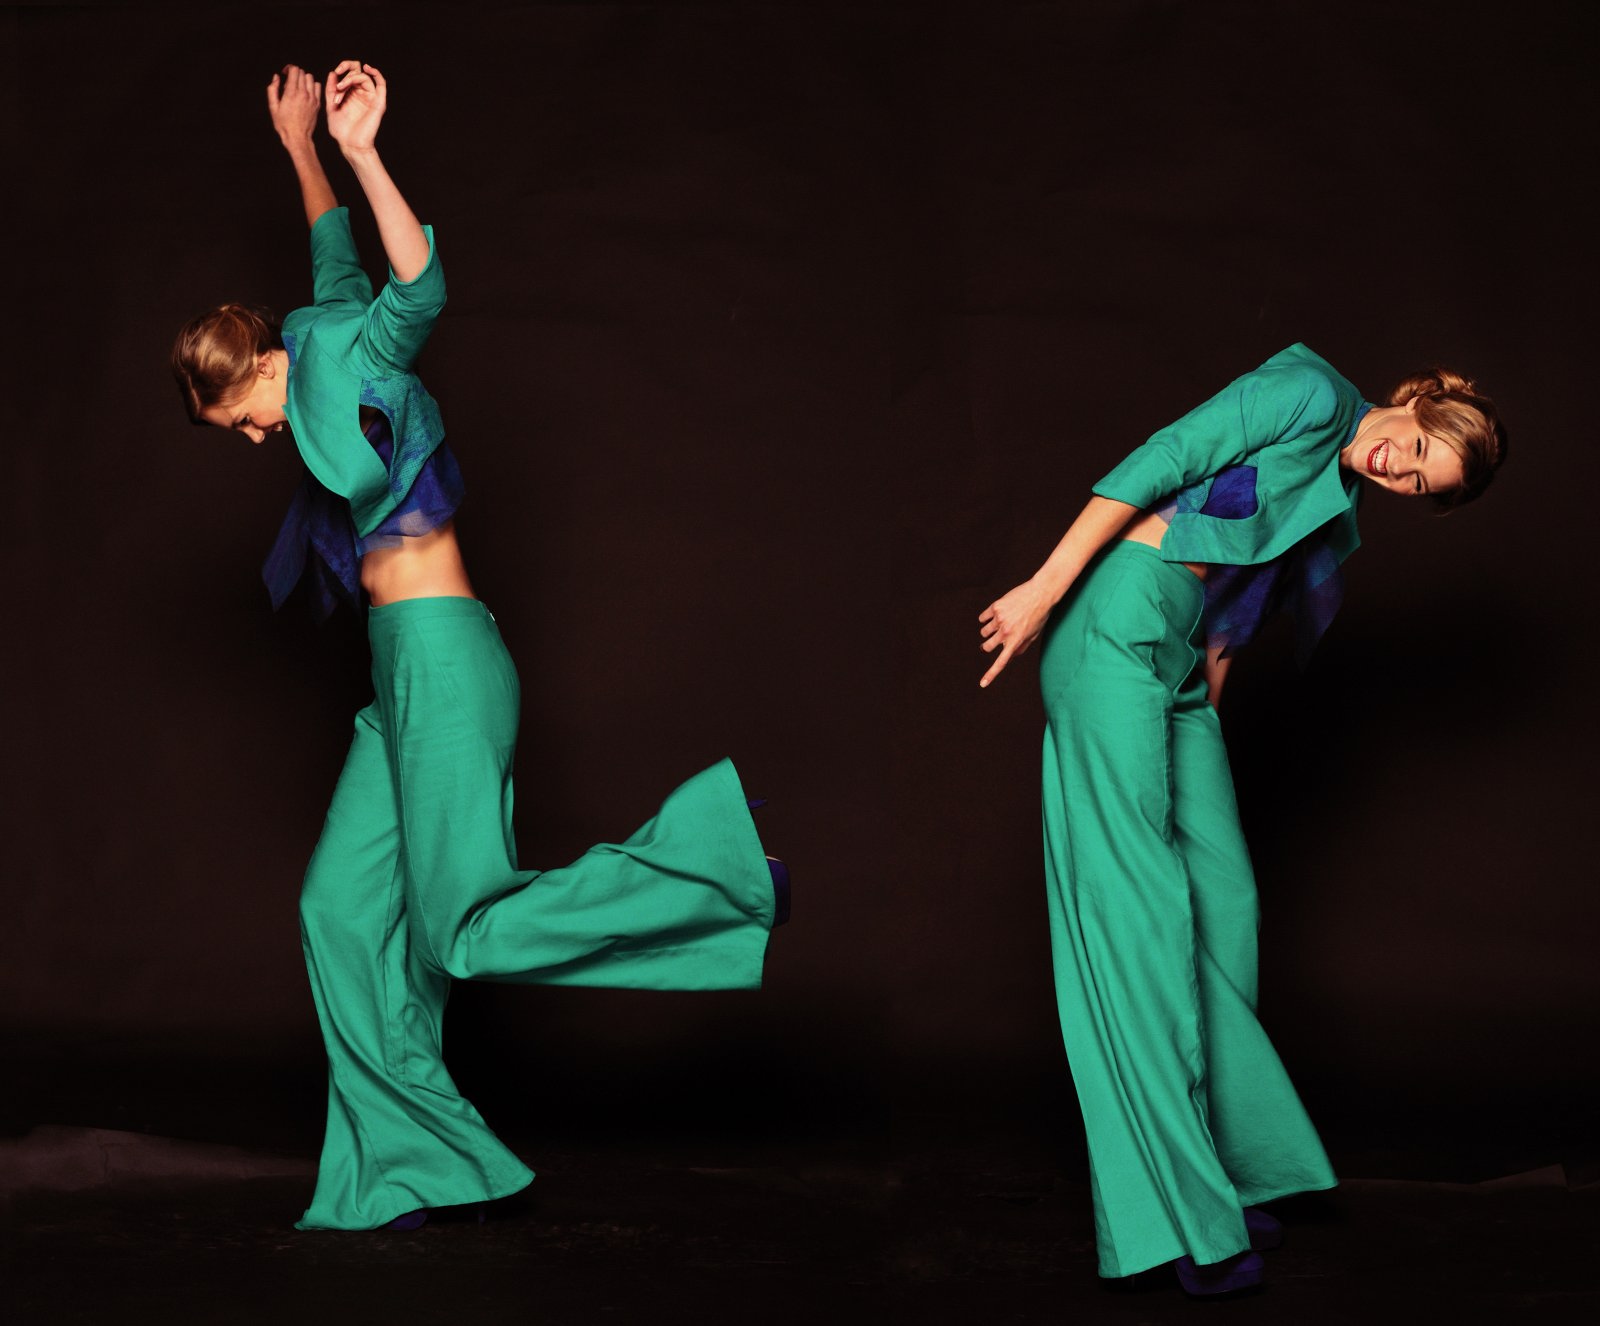 Green Pants Suit, High Fashion Shoot Studio Shots with movement by Kent Johnson.